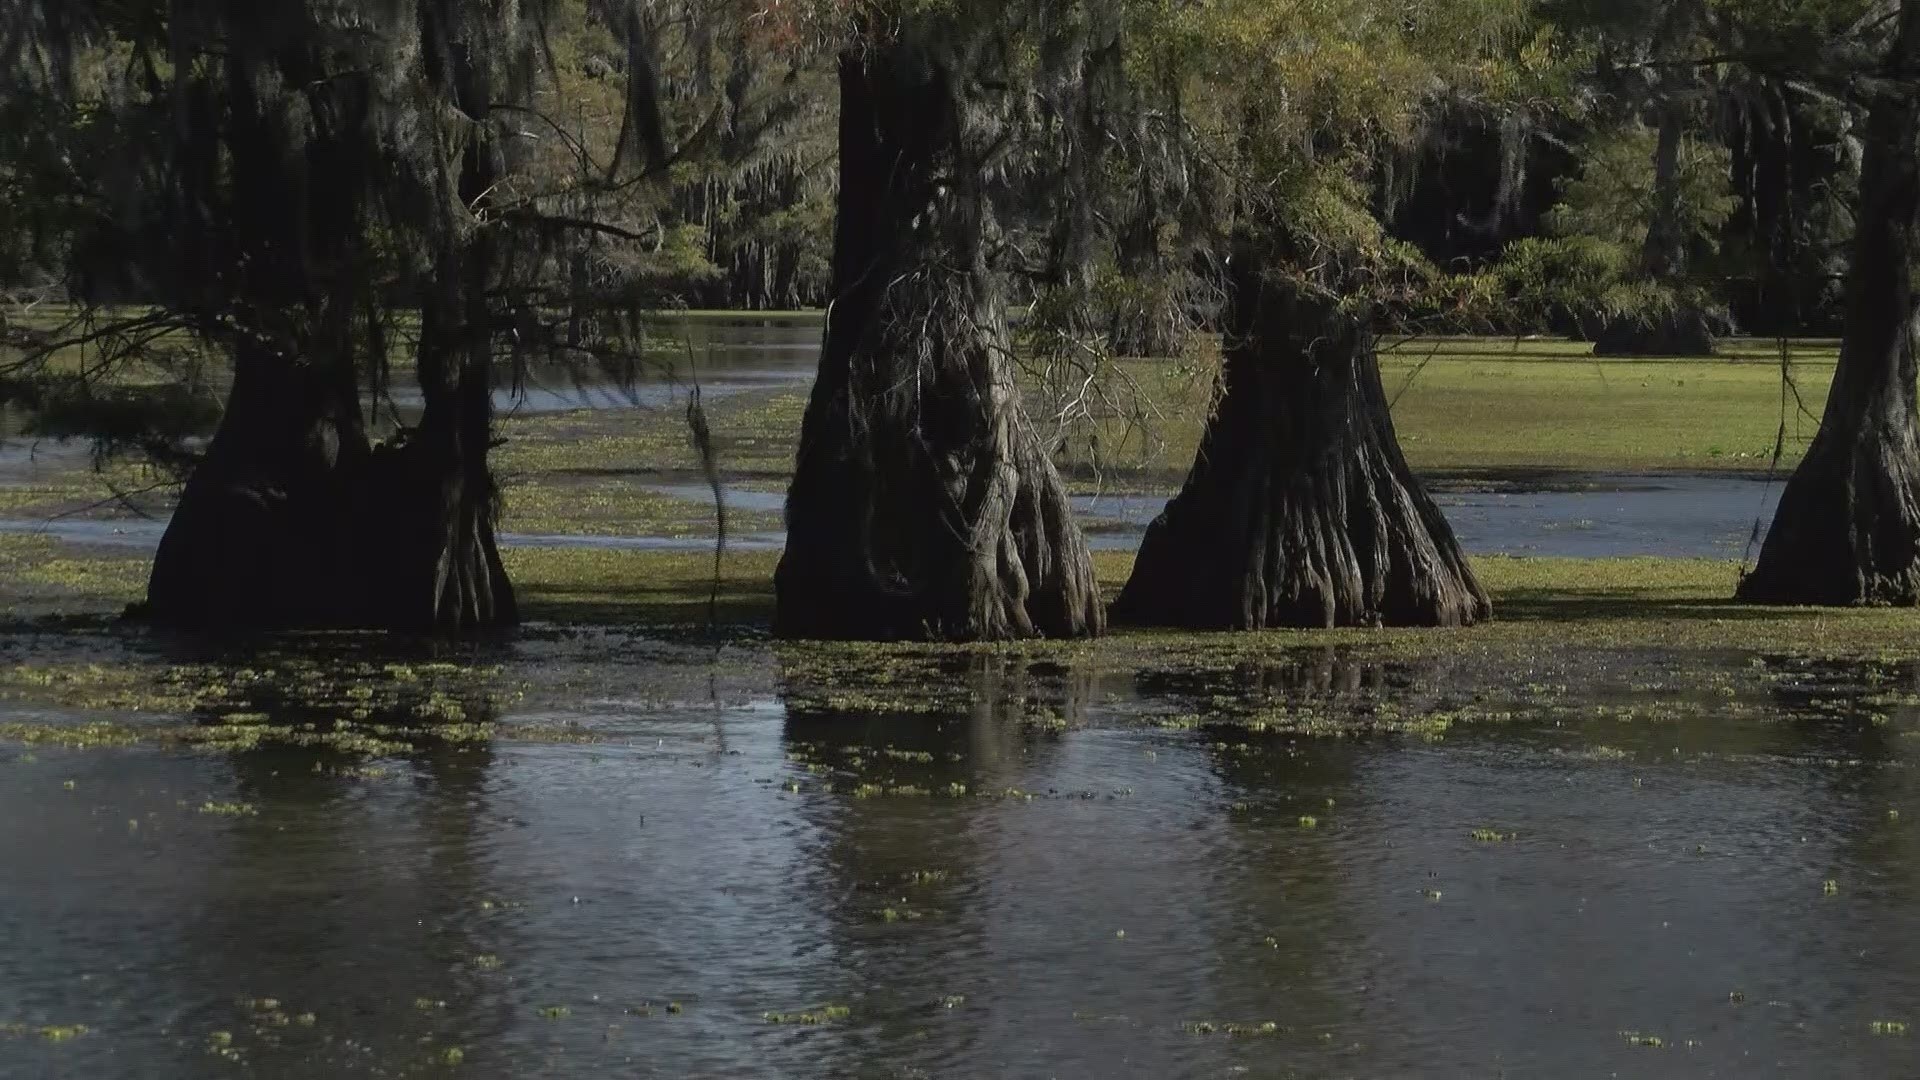 With a population of less than 100 people, it's places like Caddo Lake that draw thousands of tourists to the city every year.